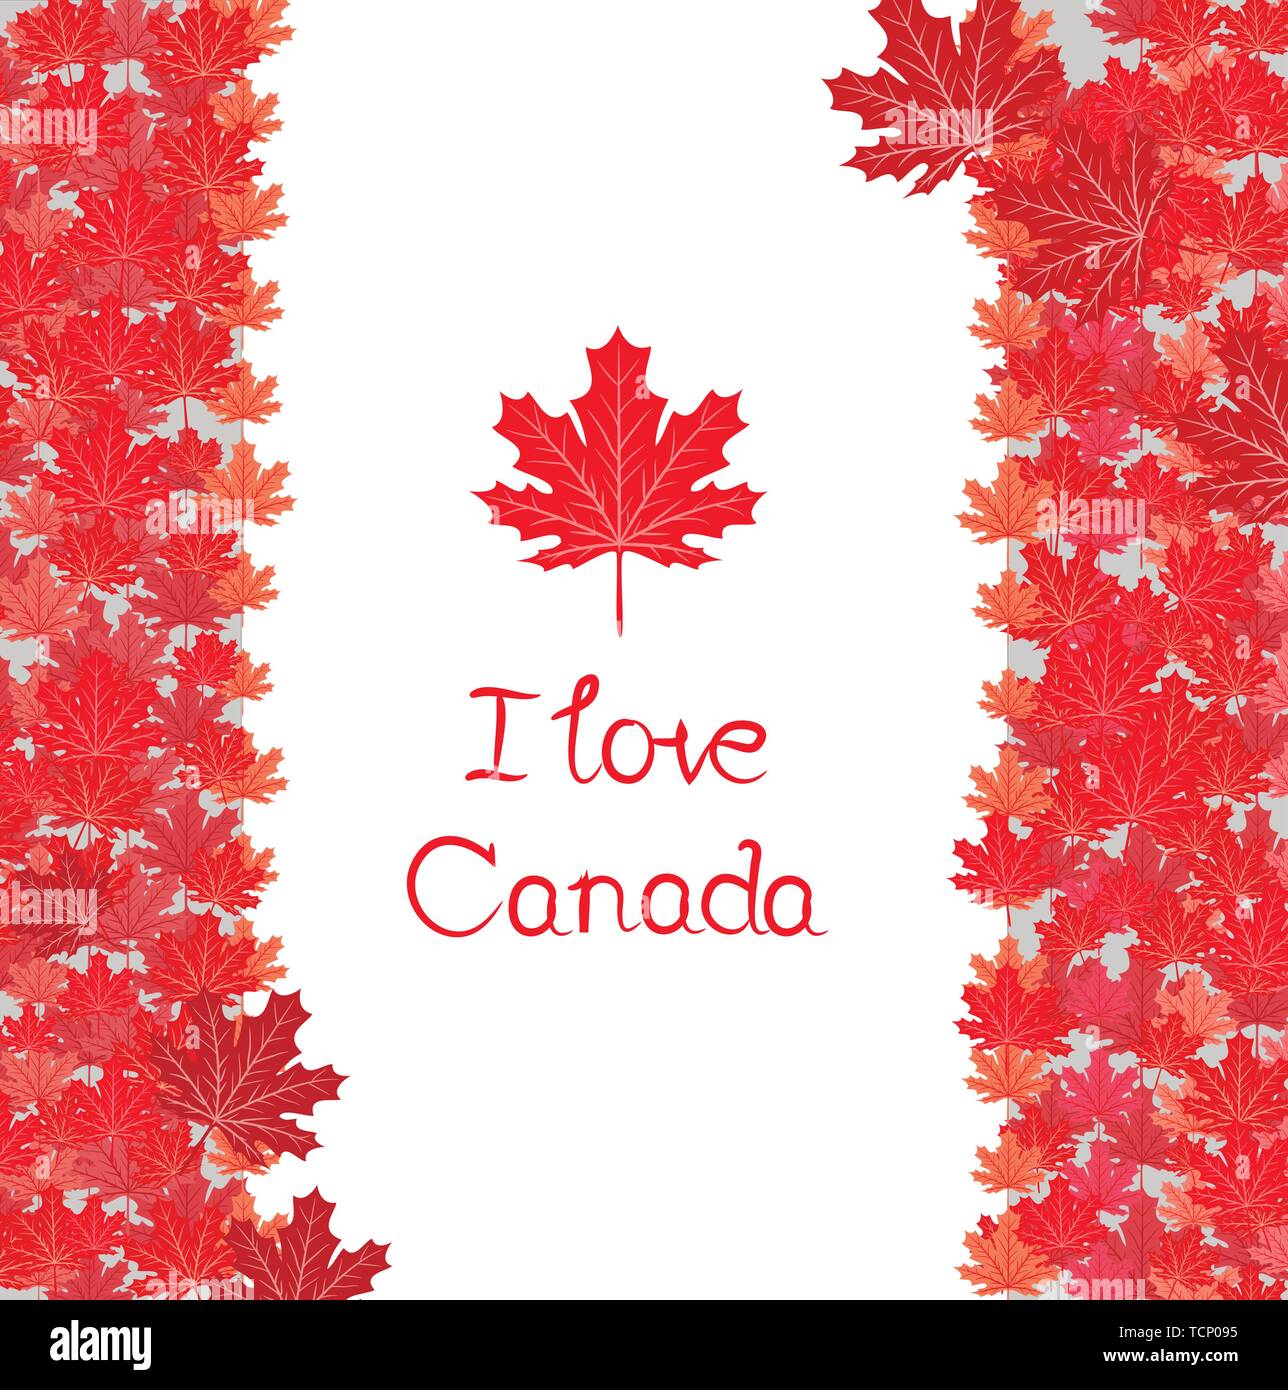 Happy canada day vector template with maple leaves Stock Vector